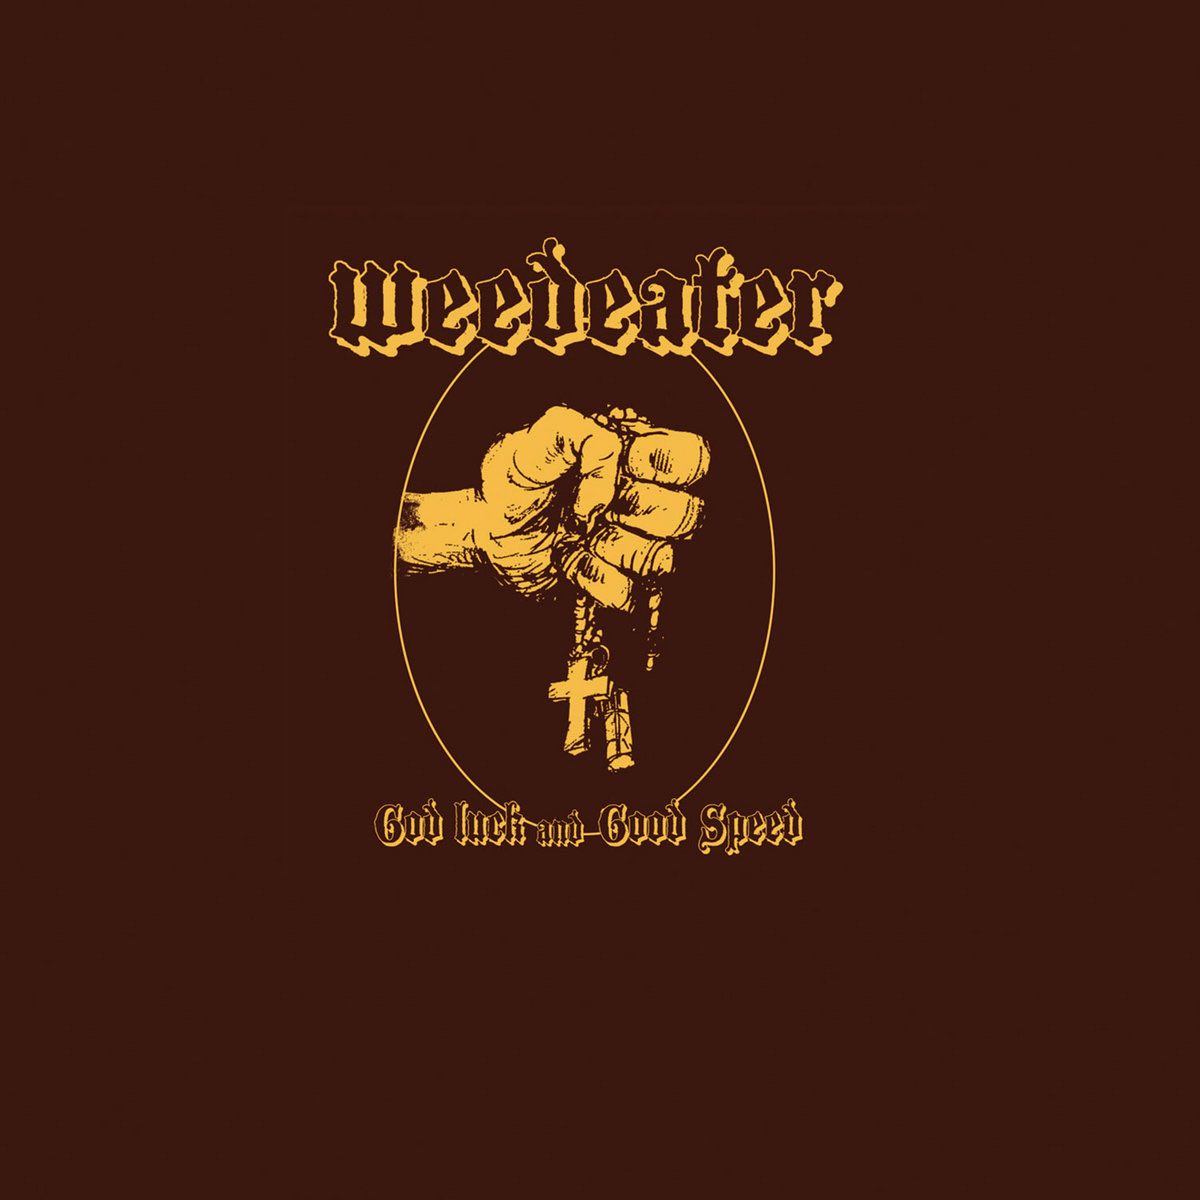 Weedeater - God Luck and Good Speed LP